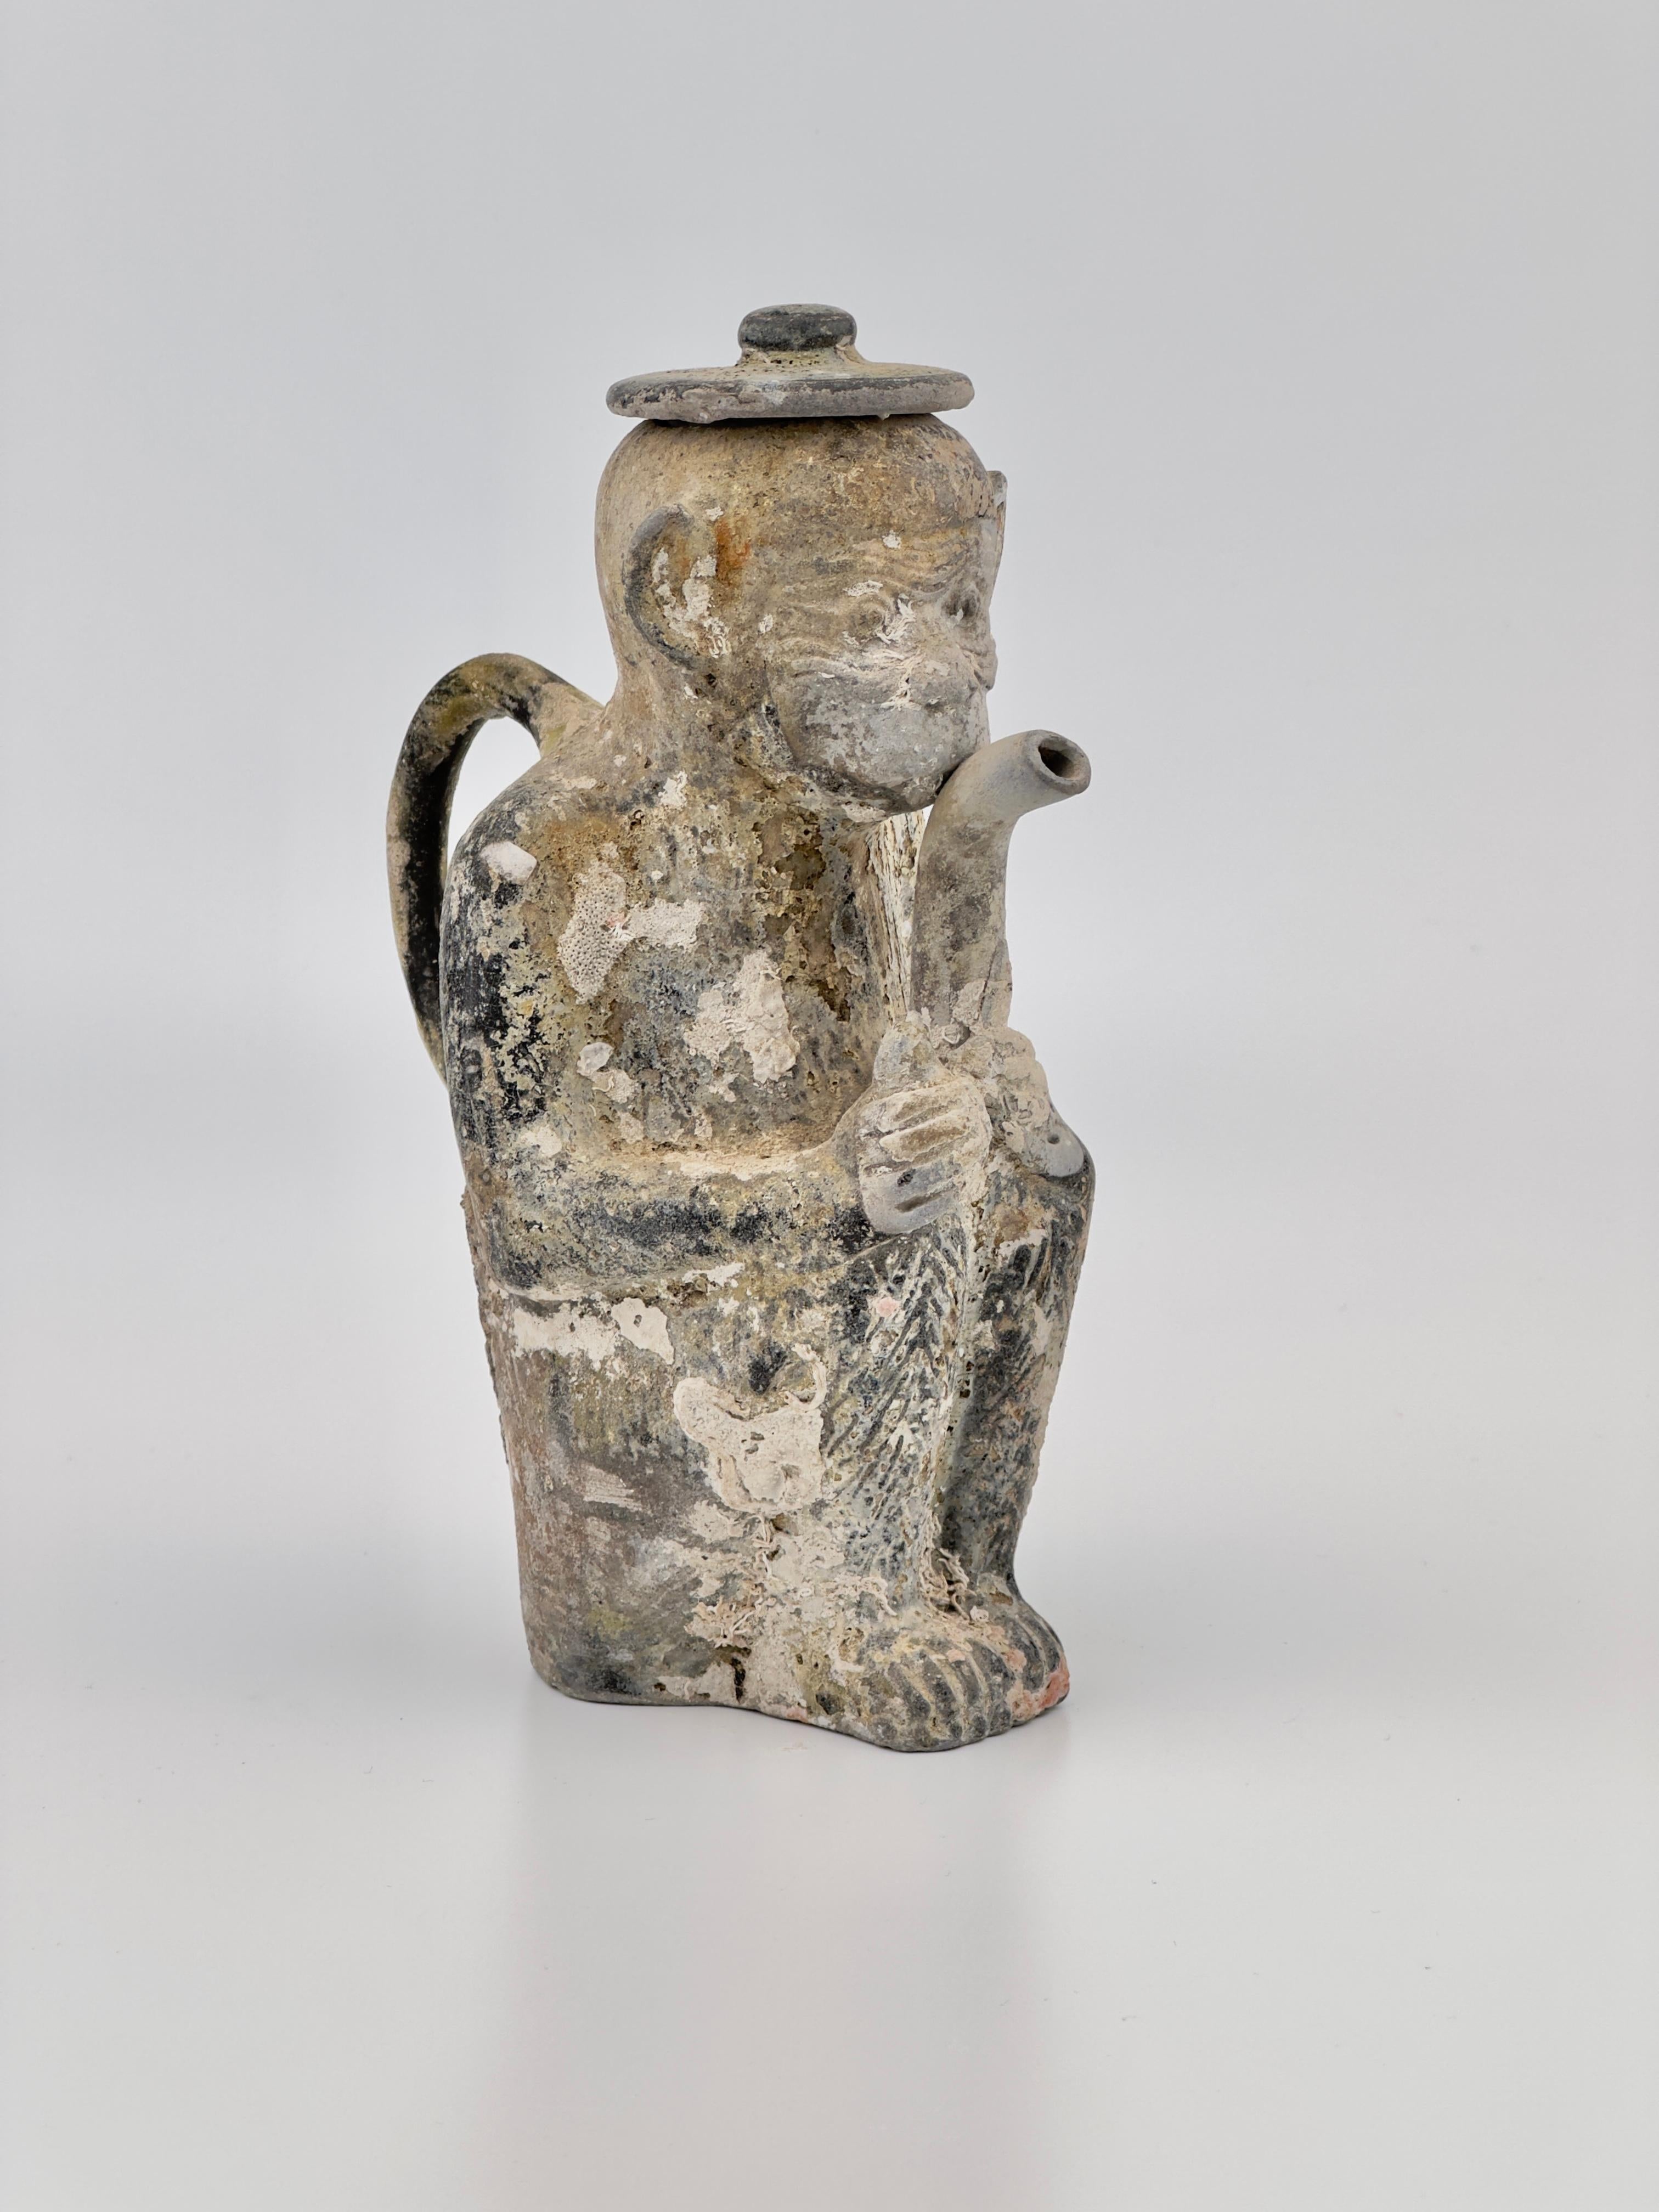 This statue is a representative piece excavated from the Ca Mau shipwreck and is so rare that there are only a few pieces like it worldwide. It is even featured on the cover of the collection book by Dr. Zelnik, highlighting its scarcity. Ewer and